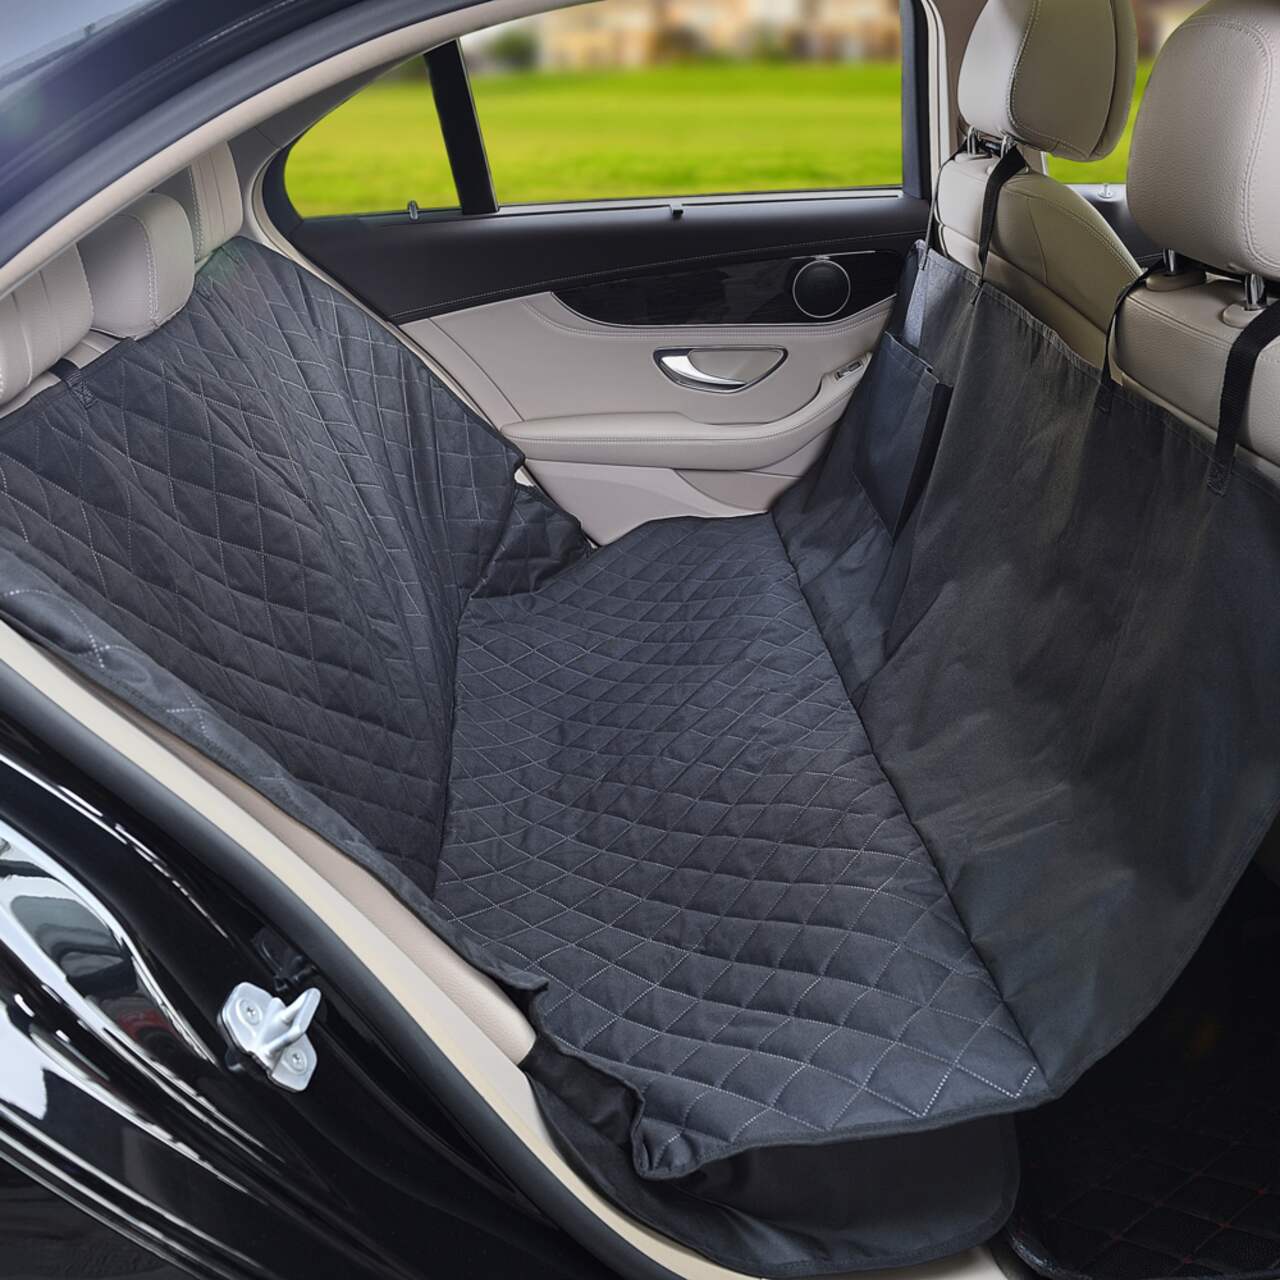 Pick your free pad cover or hammock cover with purchase of any Car